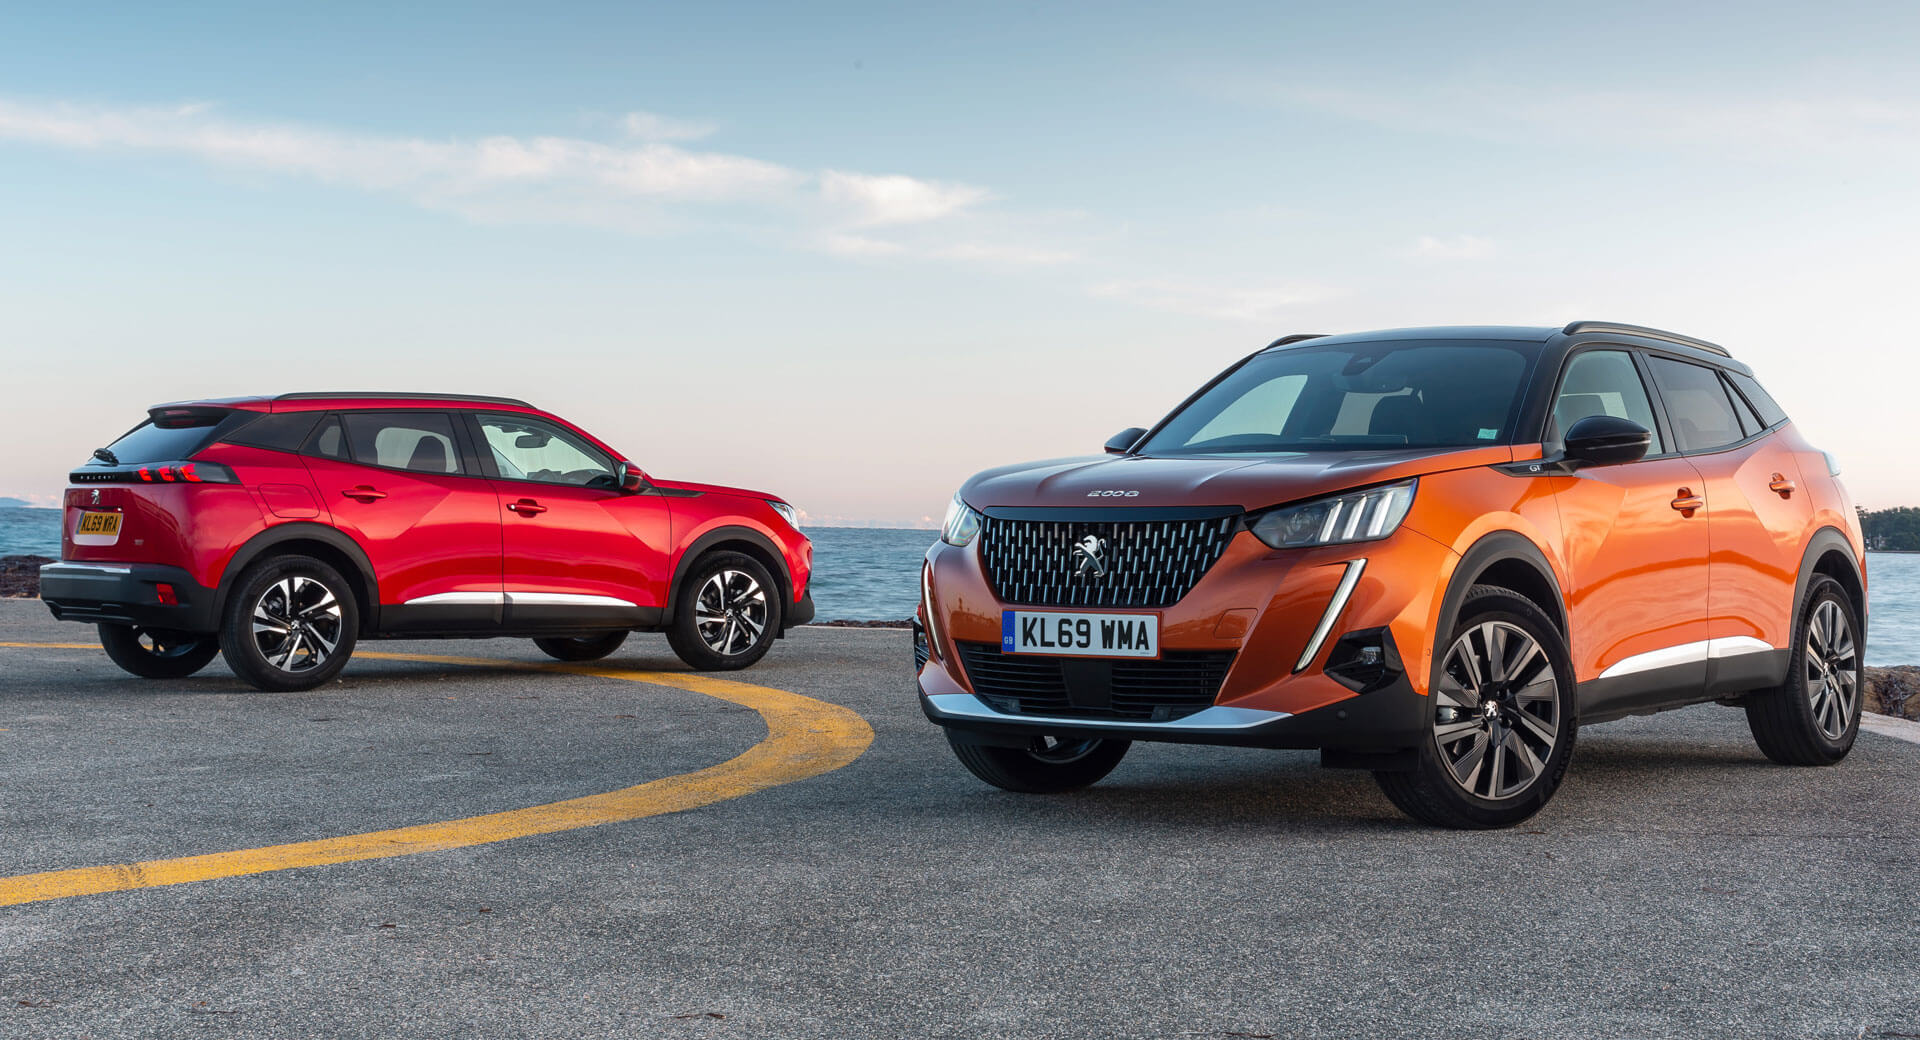 2020 Peugeot 2008, e-2008 Launched In The UK, Start At £20,150 And £28,150